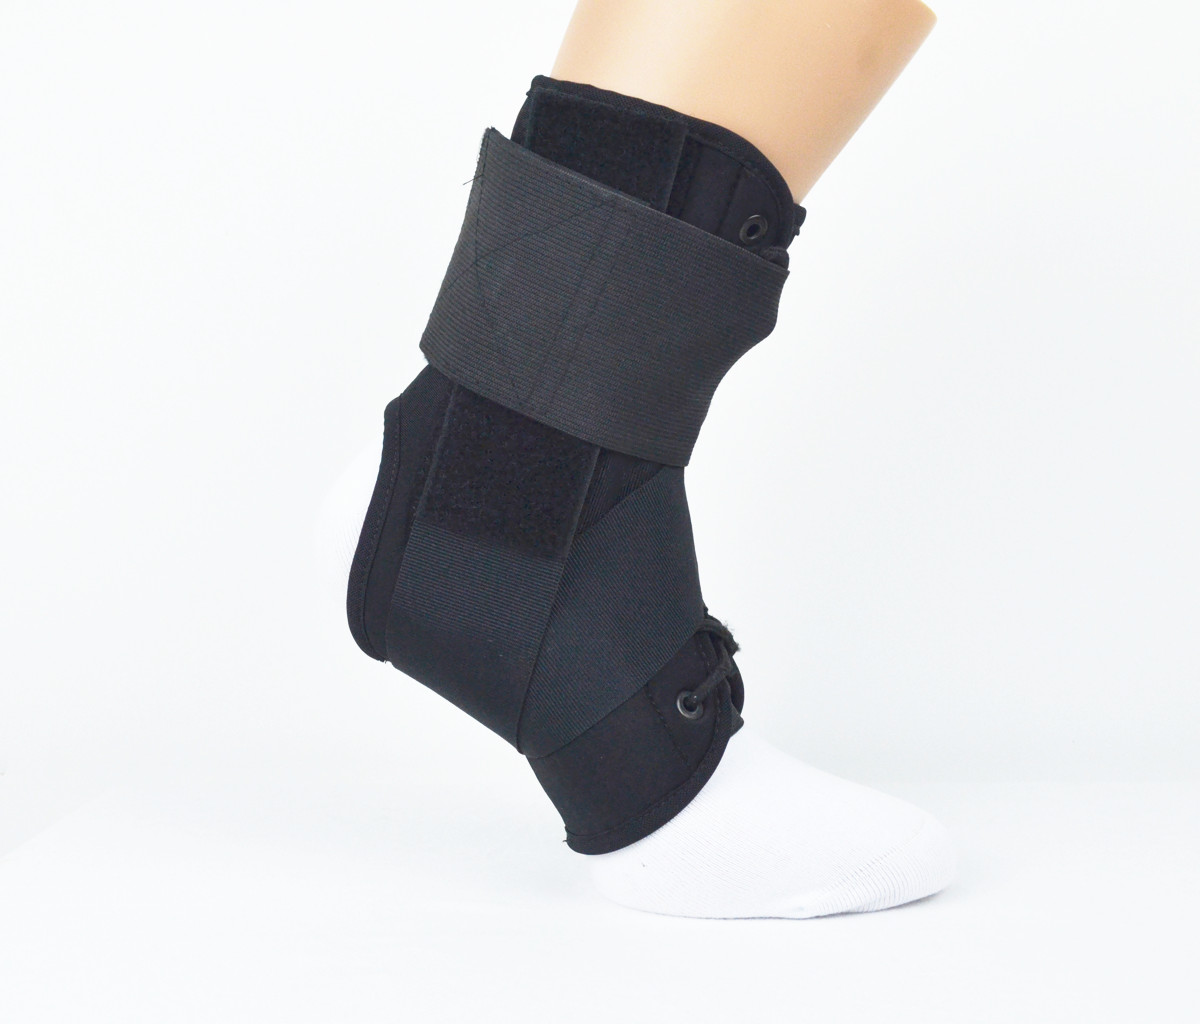 Orthopedic Ankle Brace, Lace up adjustable ankle brace – for Running, Basketball, Injury Recovery, Wholesale & OEM  6143